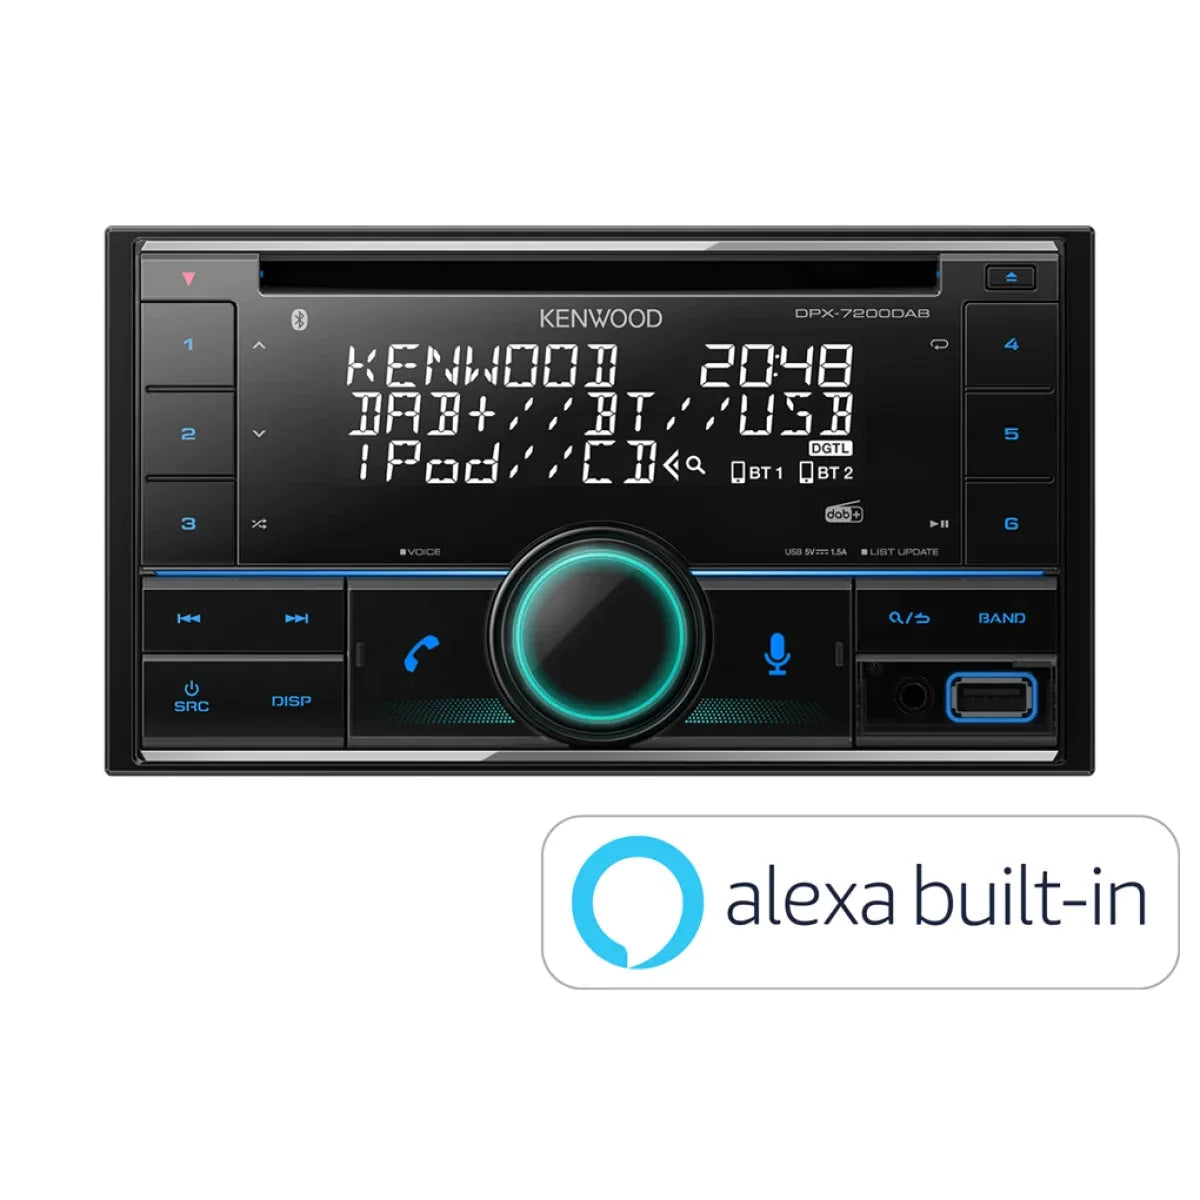  Kenwood DPX-7200DAB 2-DIN CD Car Radio with DAB+ and Bluetooth  Hands-Free Kit (Alexa Built-in, USB, AUX-In, High-Performance Tuner,  Spotify Control, Sound Processor, 4 x 50 W, Various Button Lighting) :  Electronics